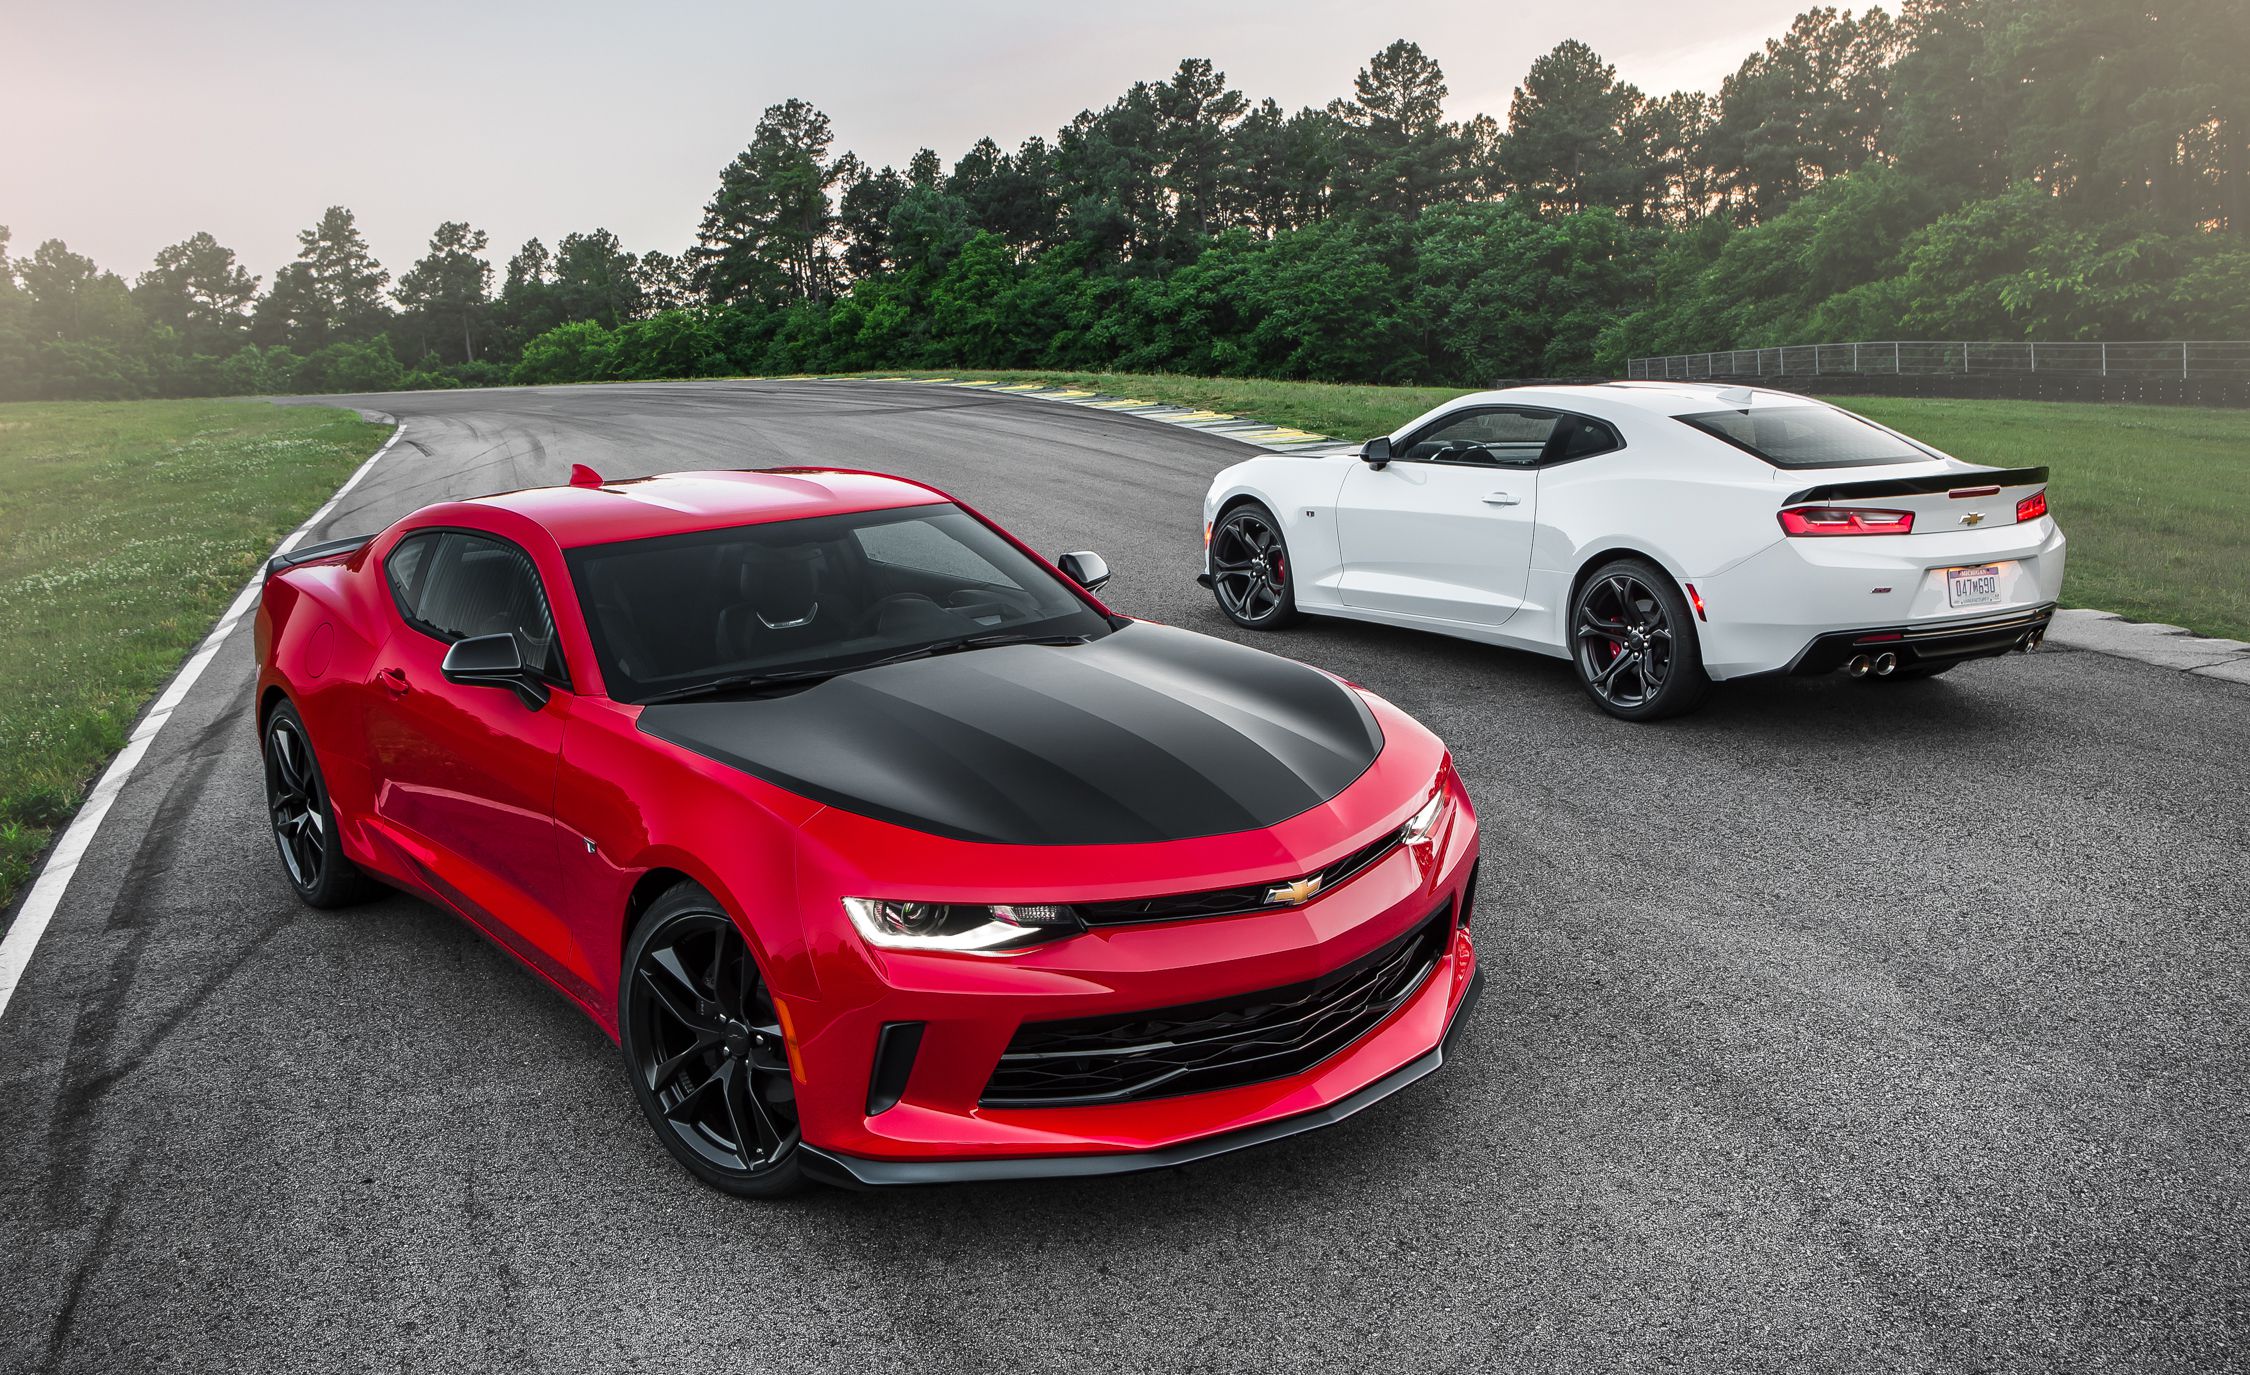 What We Think About The 2018 Chevrolet Camaro Bikers 4 Life Blog